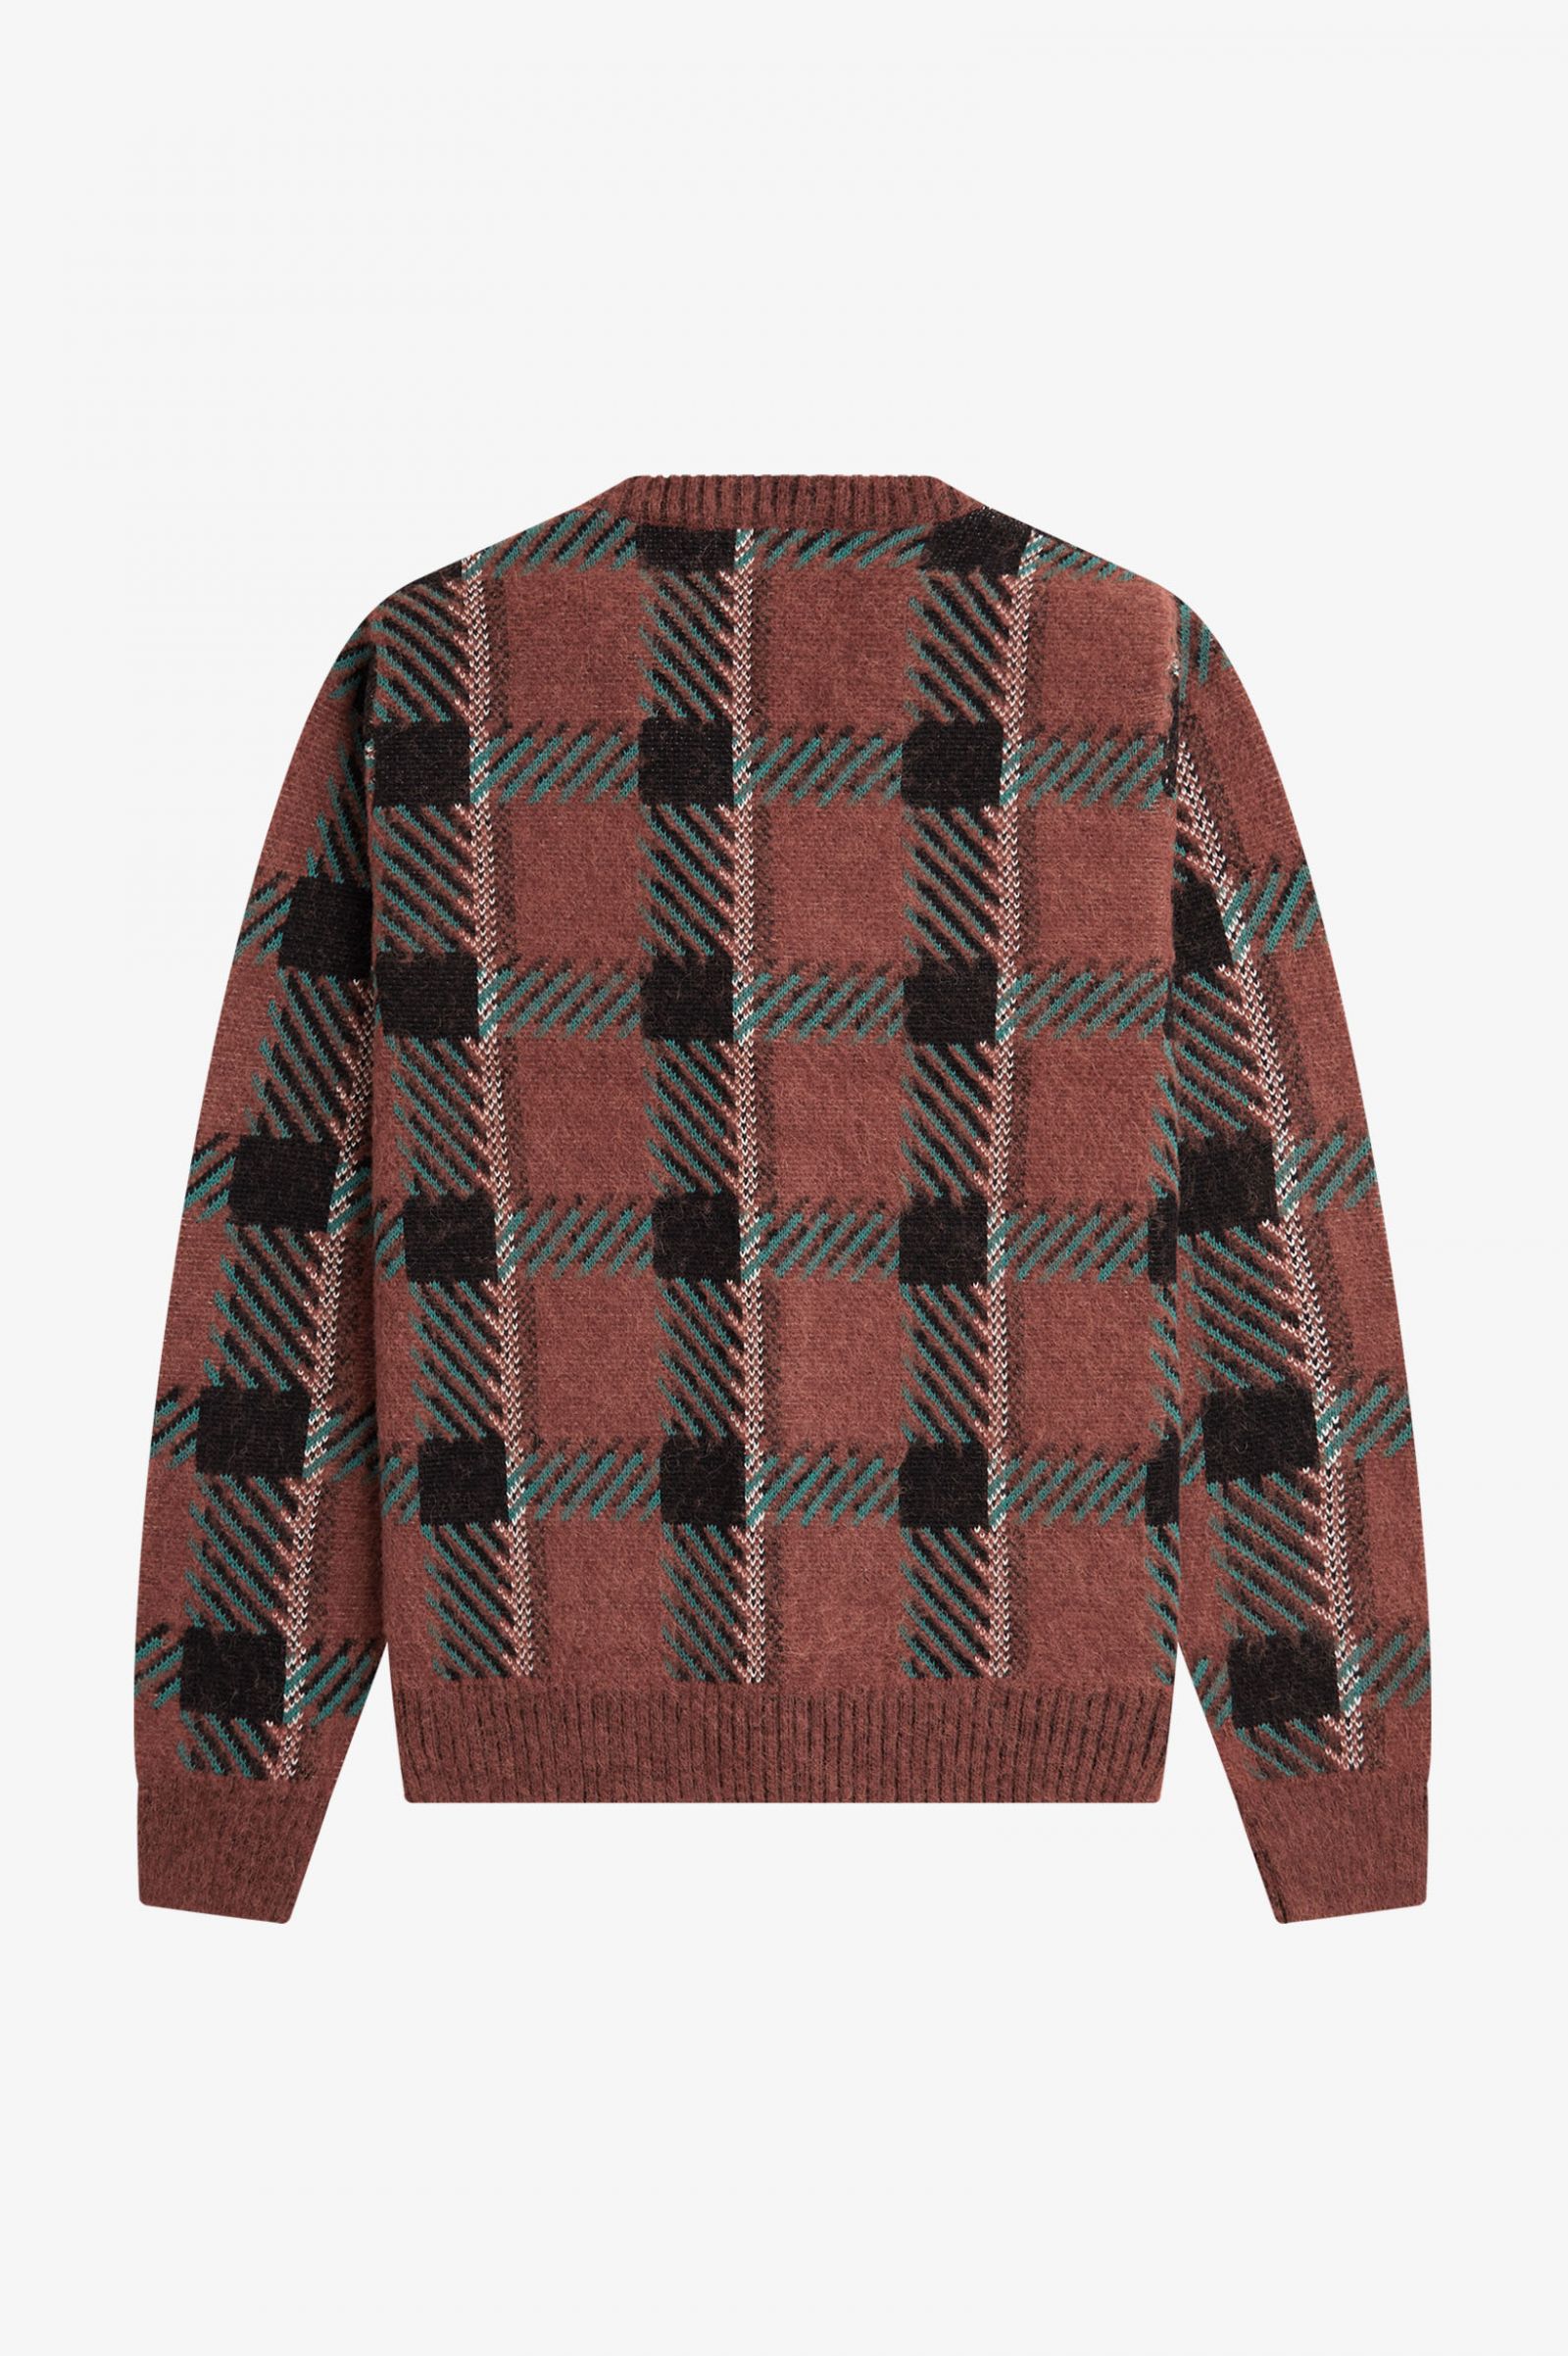 Fred Perry Glitch Tartan Cardigan in Whisky Brown